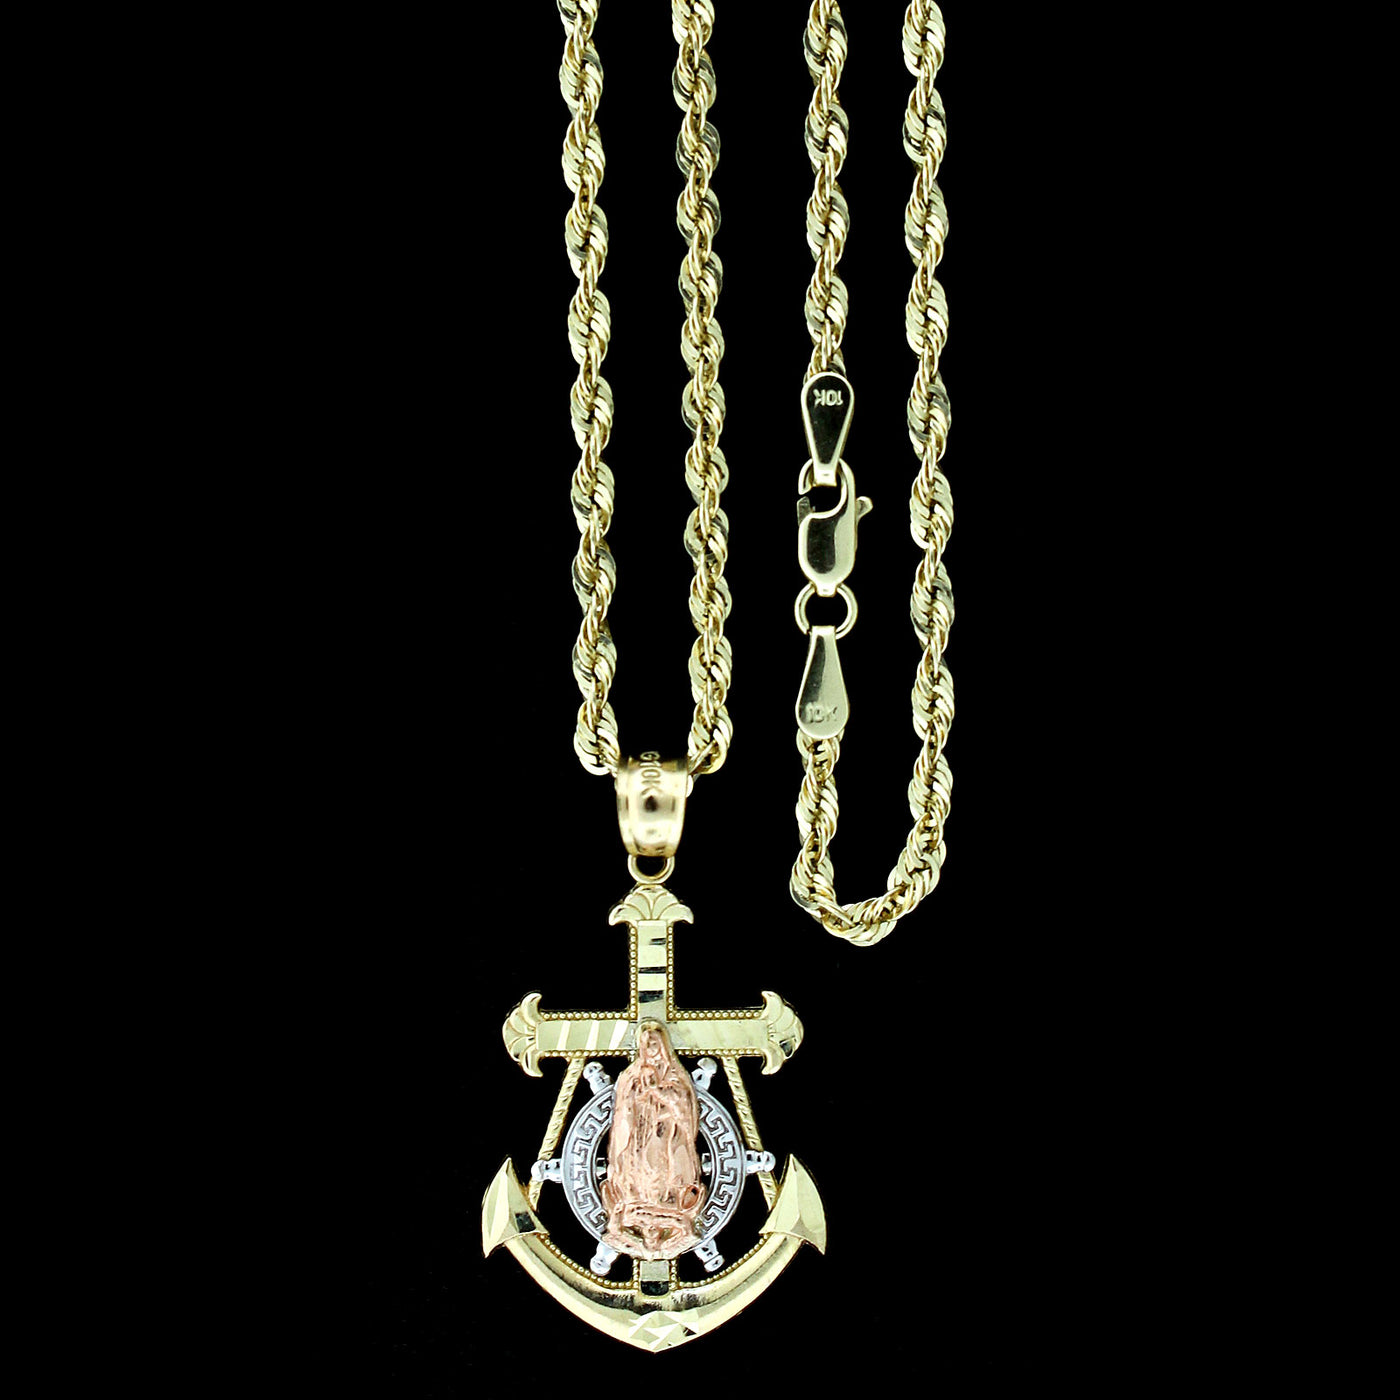 10K Yellow White Rose Gold Virgin Mary Anchor Cross Pendant & 2.5mm Rope Chain Necklace Set